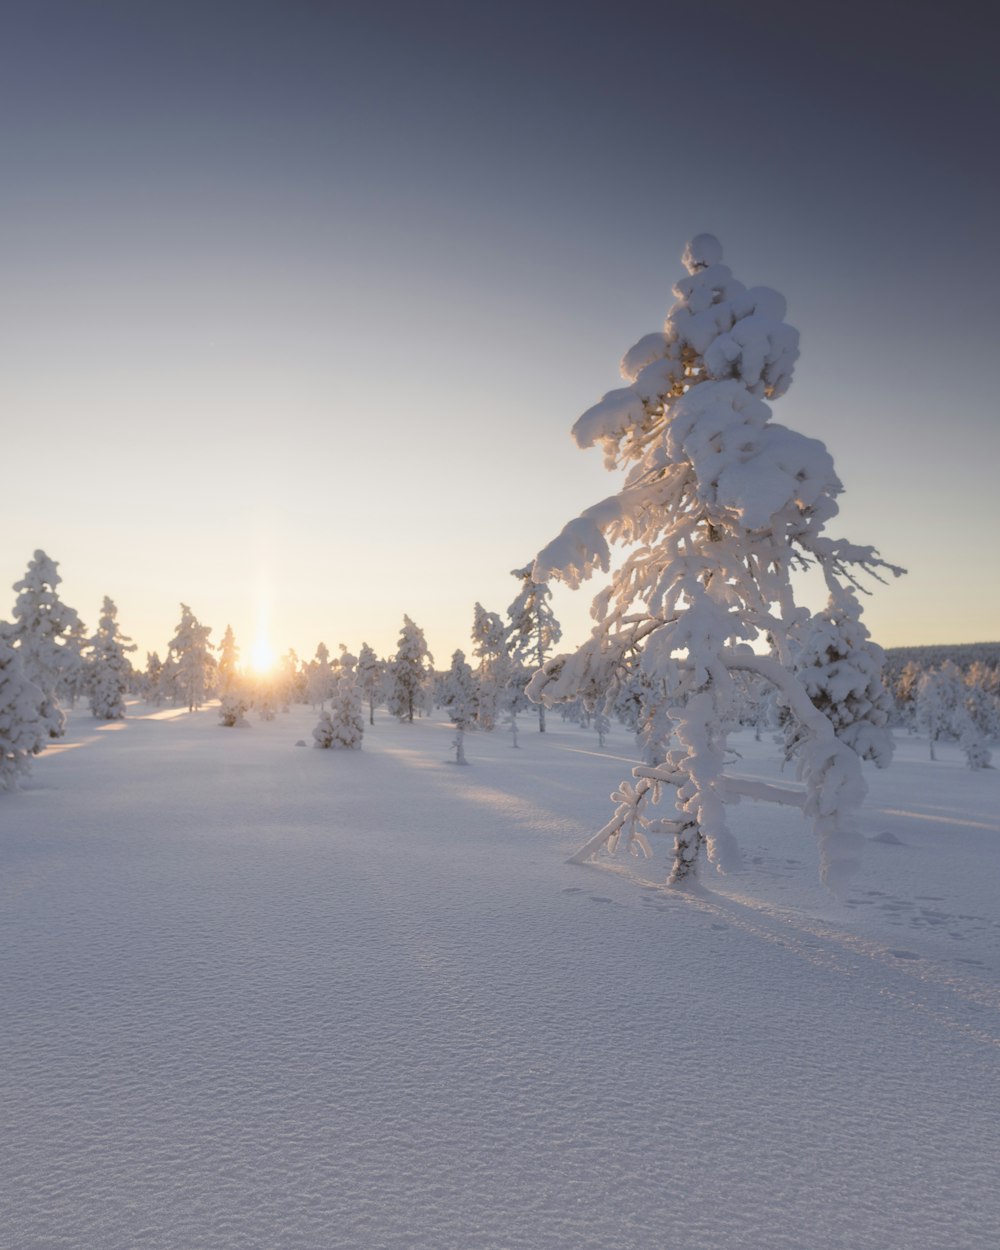 the sun is setting over a snowy landscape